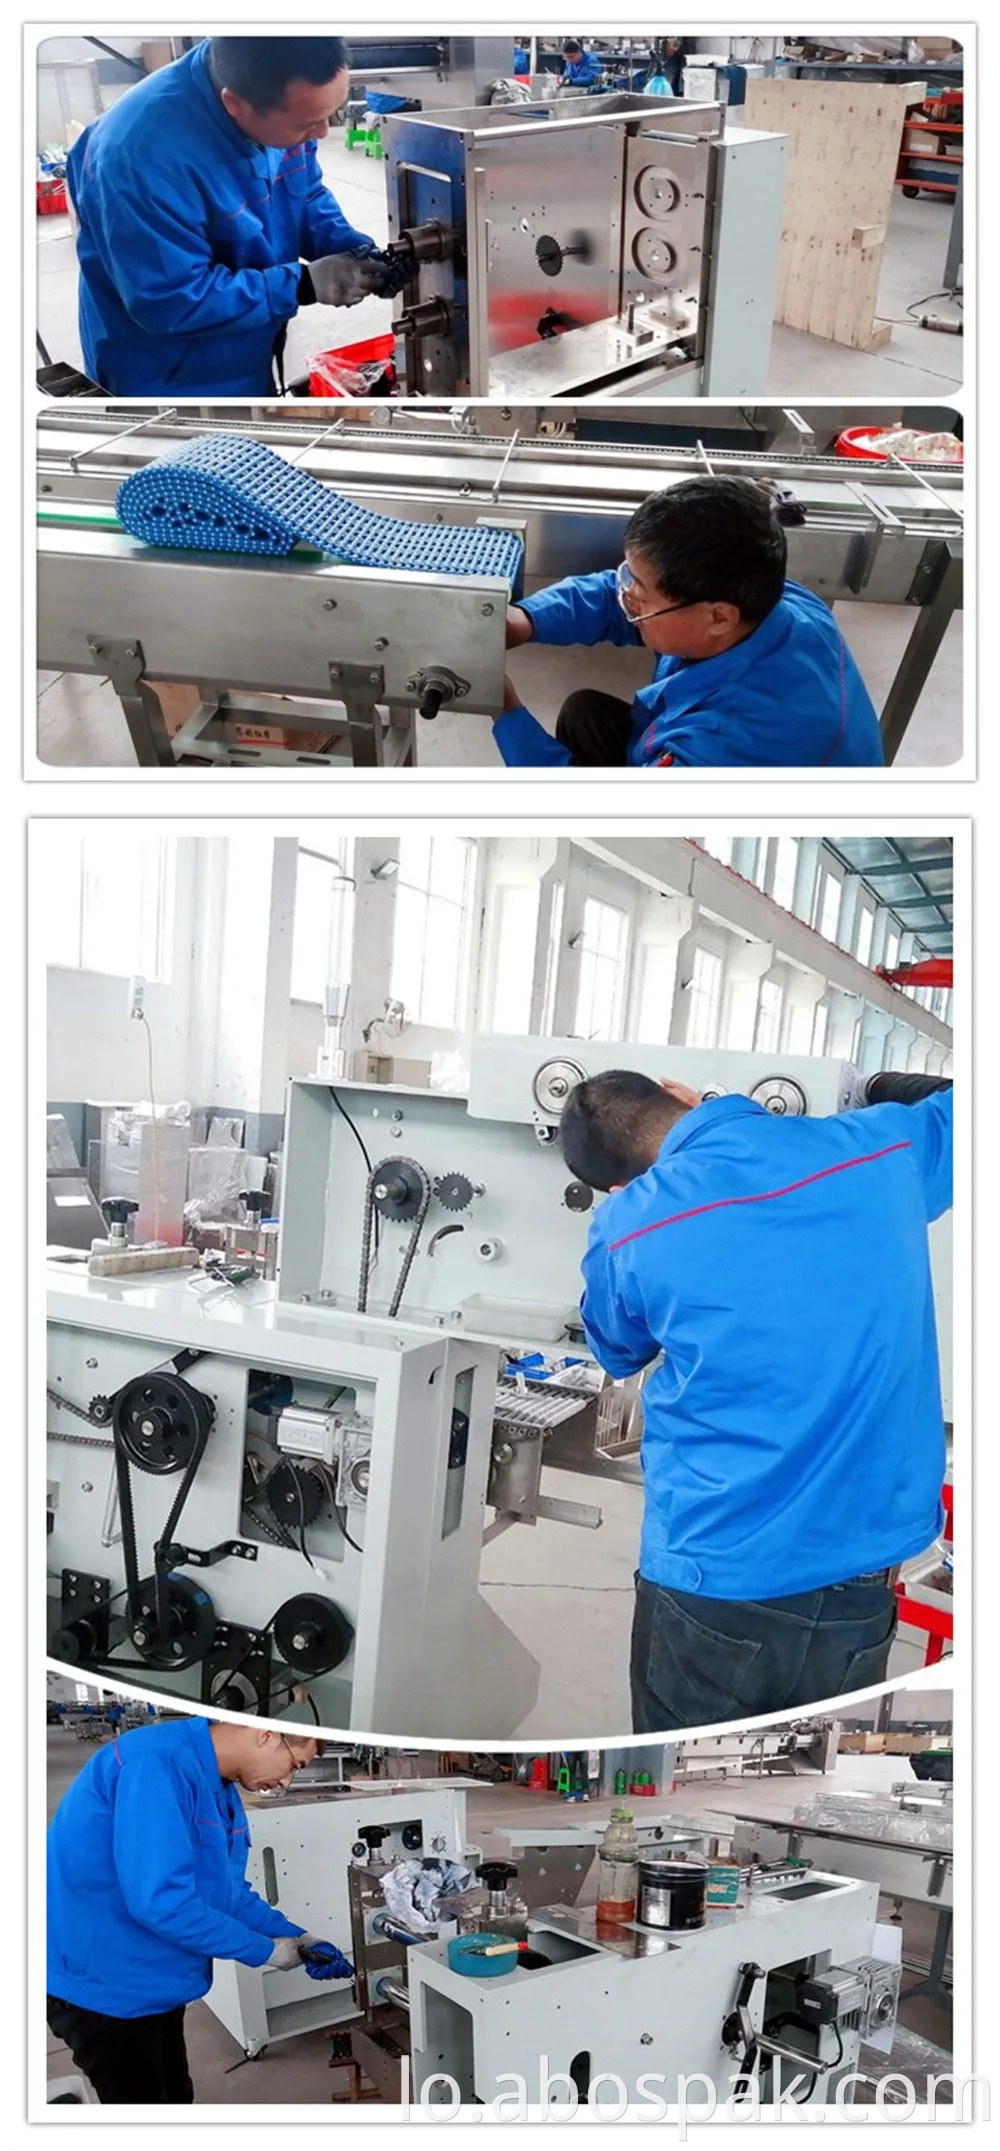 SUS 304 Automatic Flow Plasatic Bag Packing Packing Line Machine for Hotel / Laundry / Washing Soap